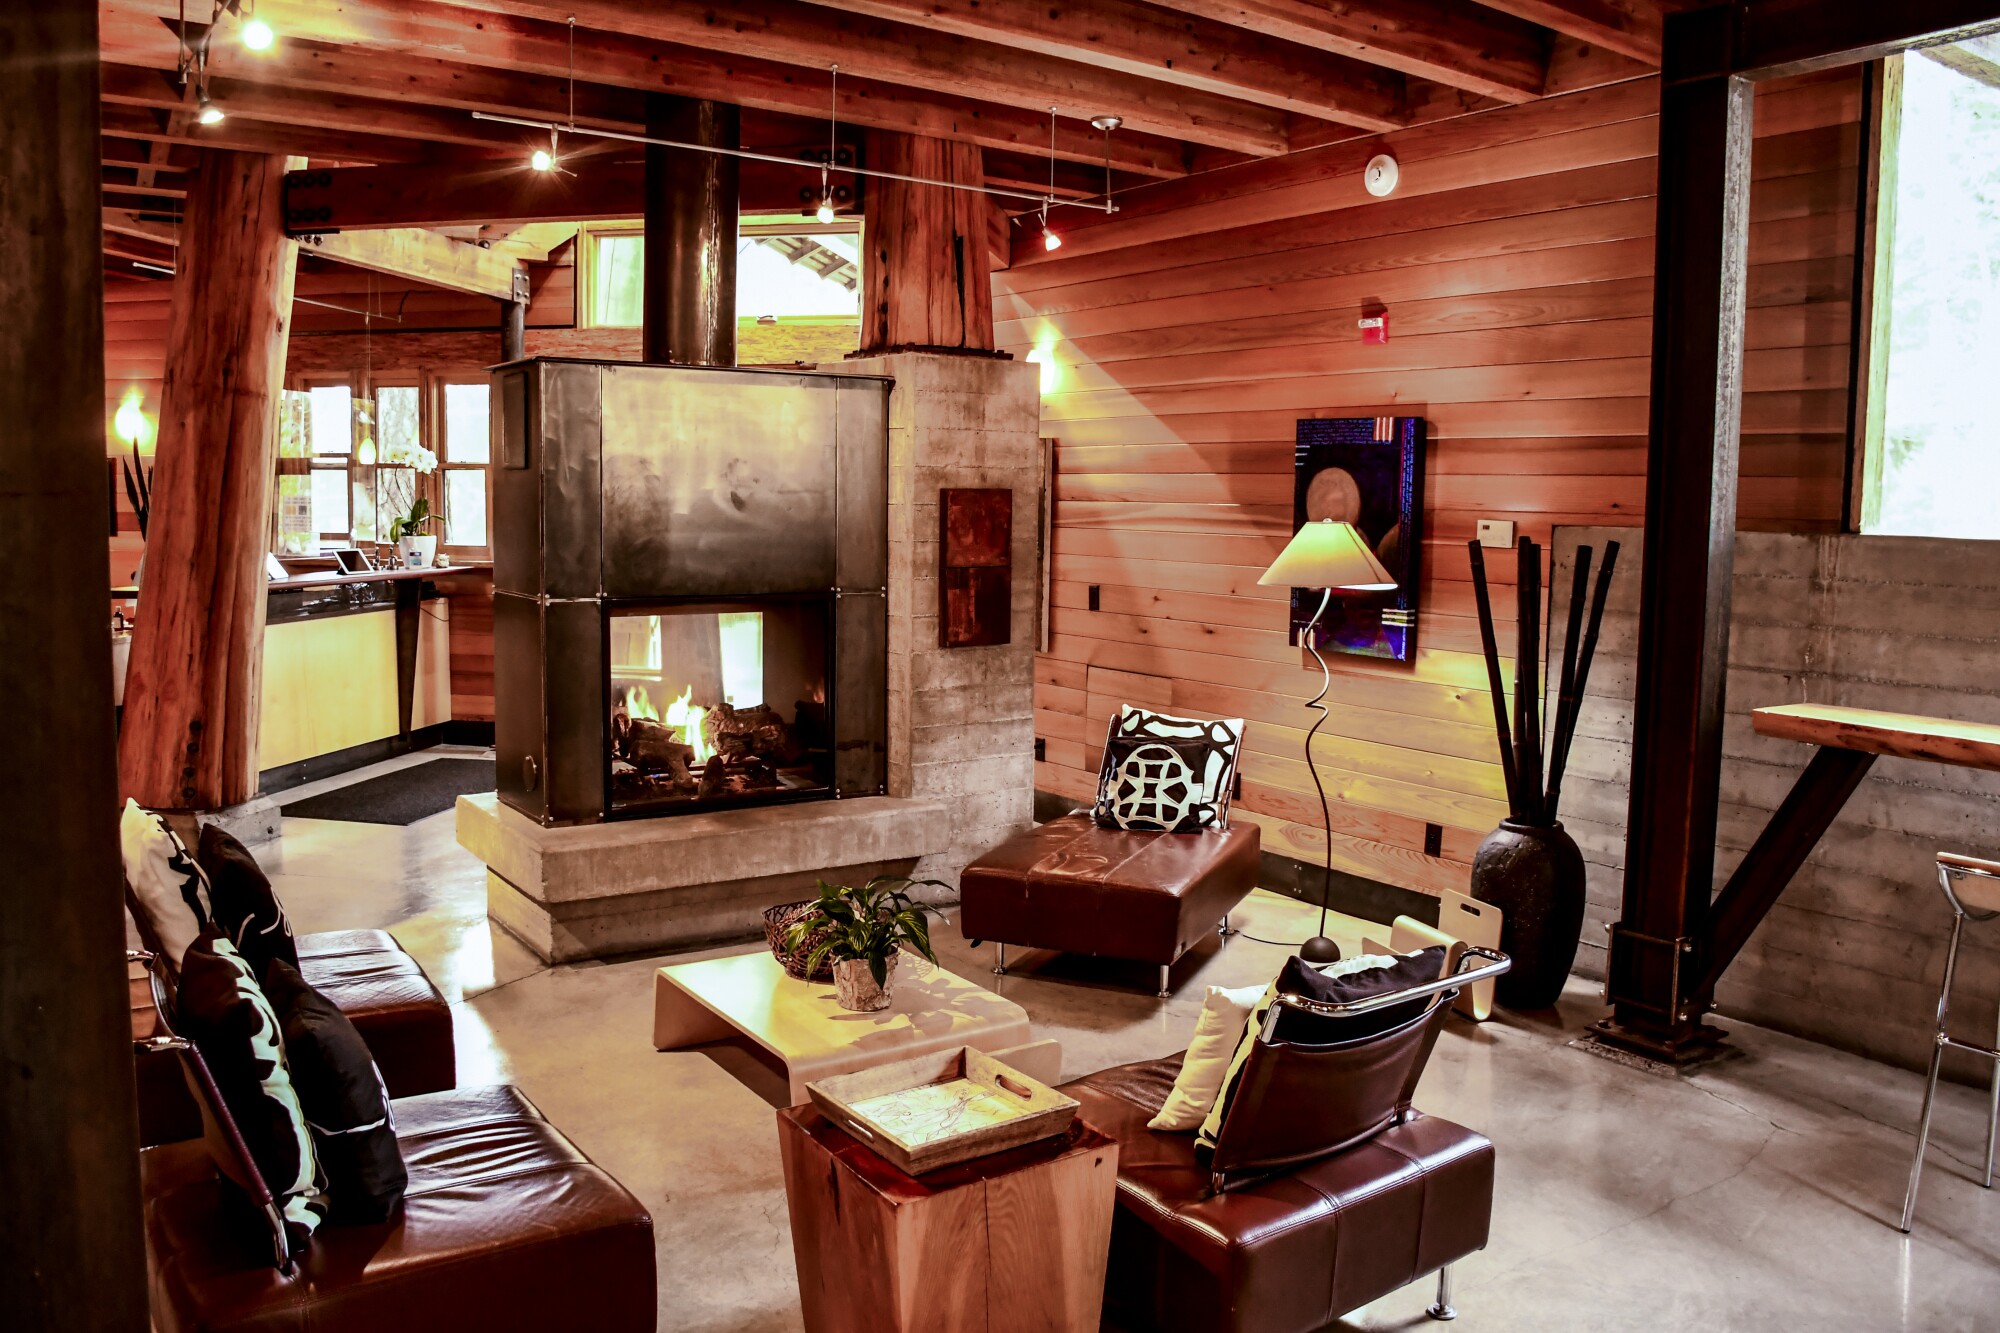 The Cedar House Sport Hotel in Truckee units login cabin style with industrial chic.